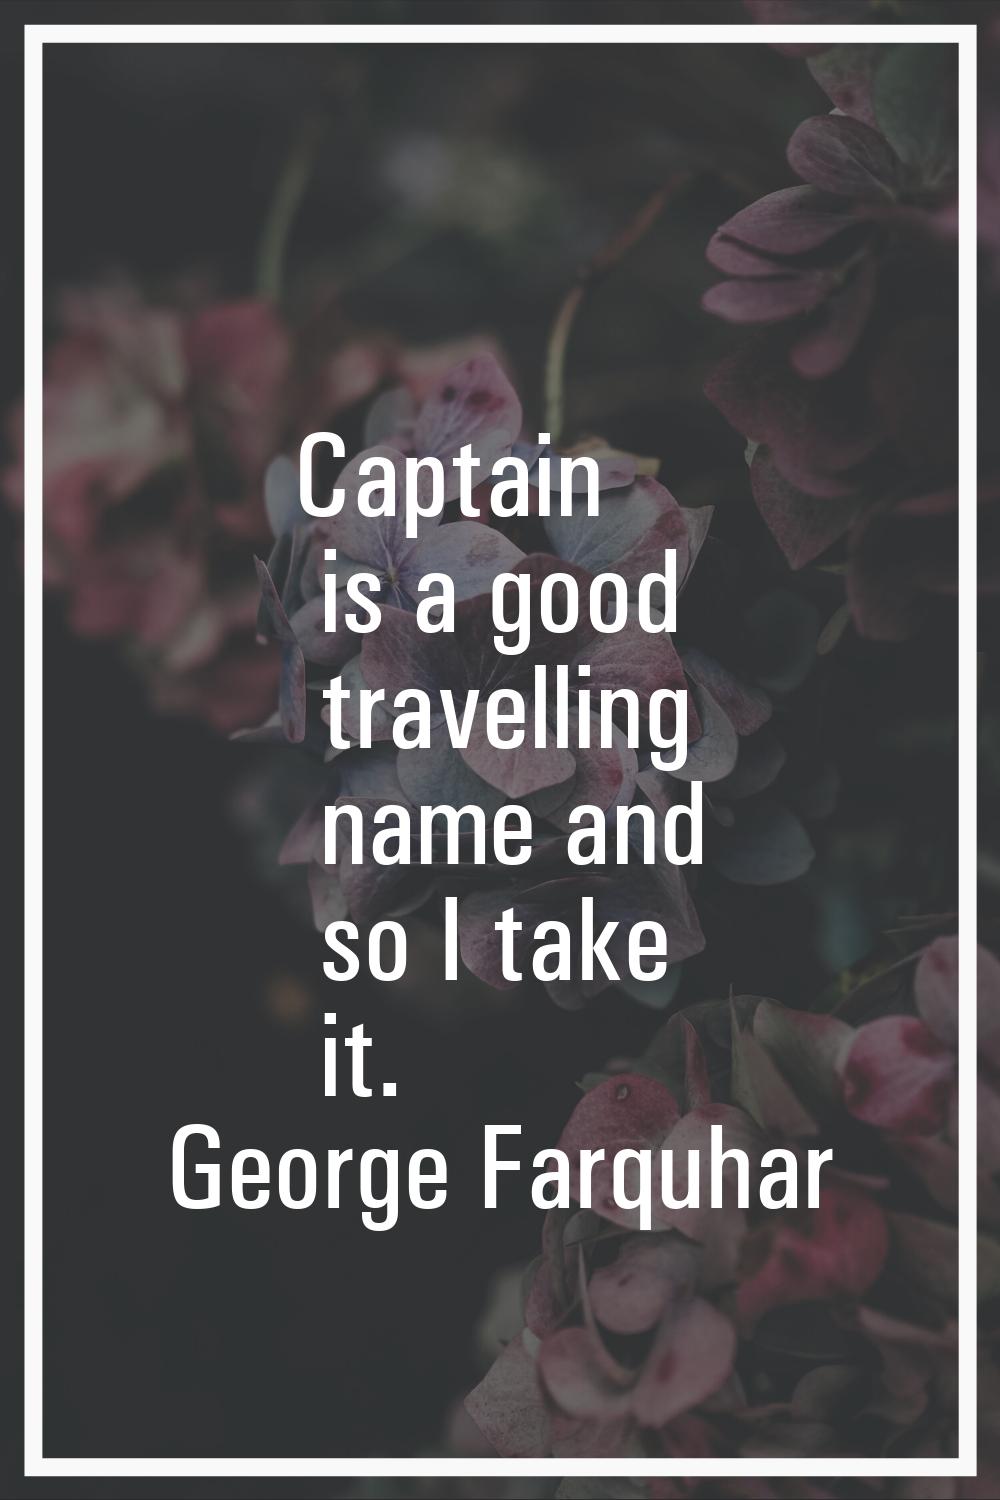 Captain is a good travelling name and so I take it.